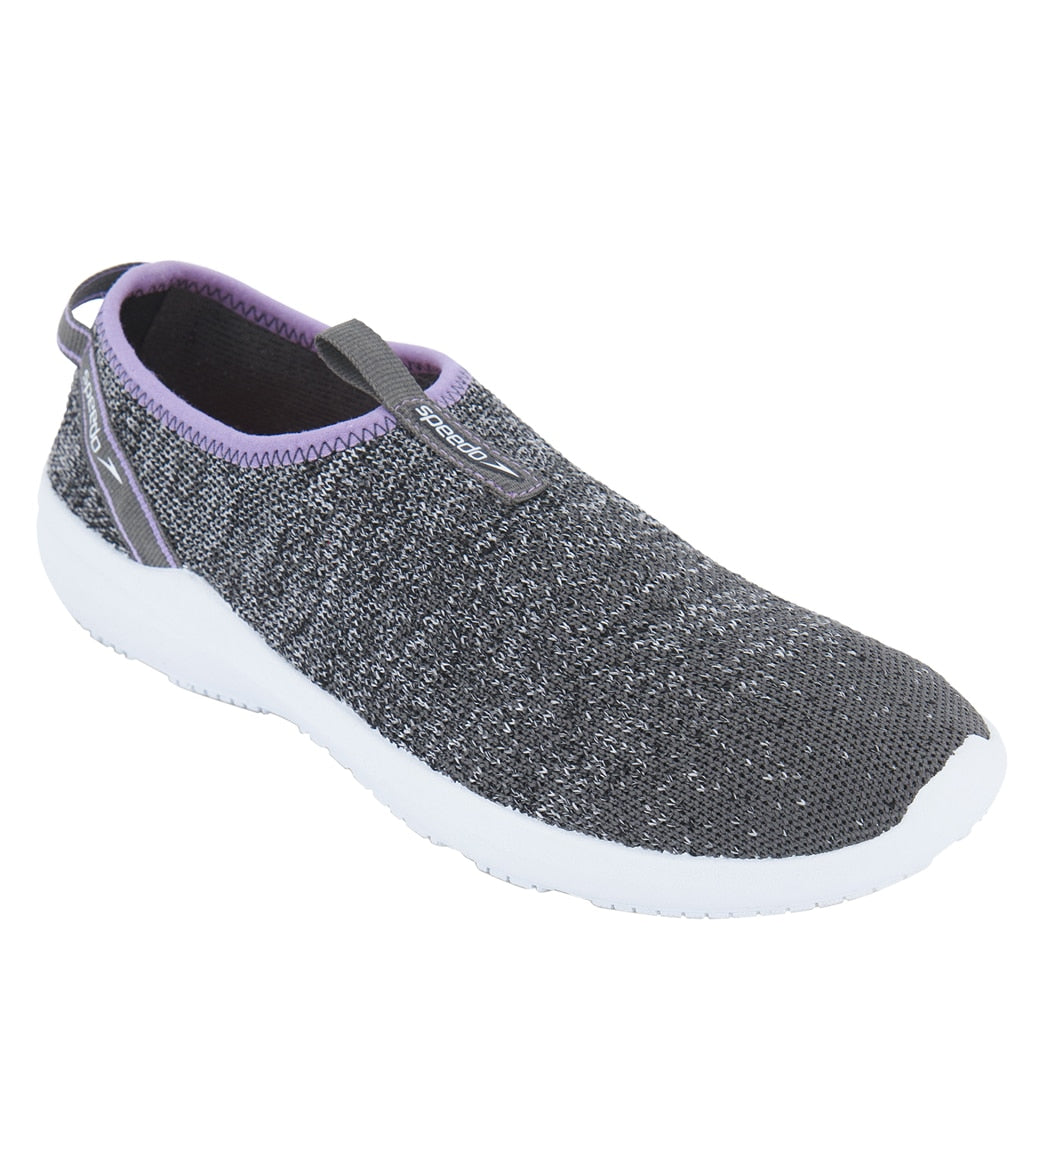 Speedo Women's Surfknit Pro Water Shoes at SwimOutlet.com